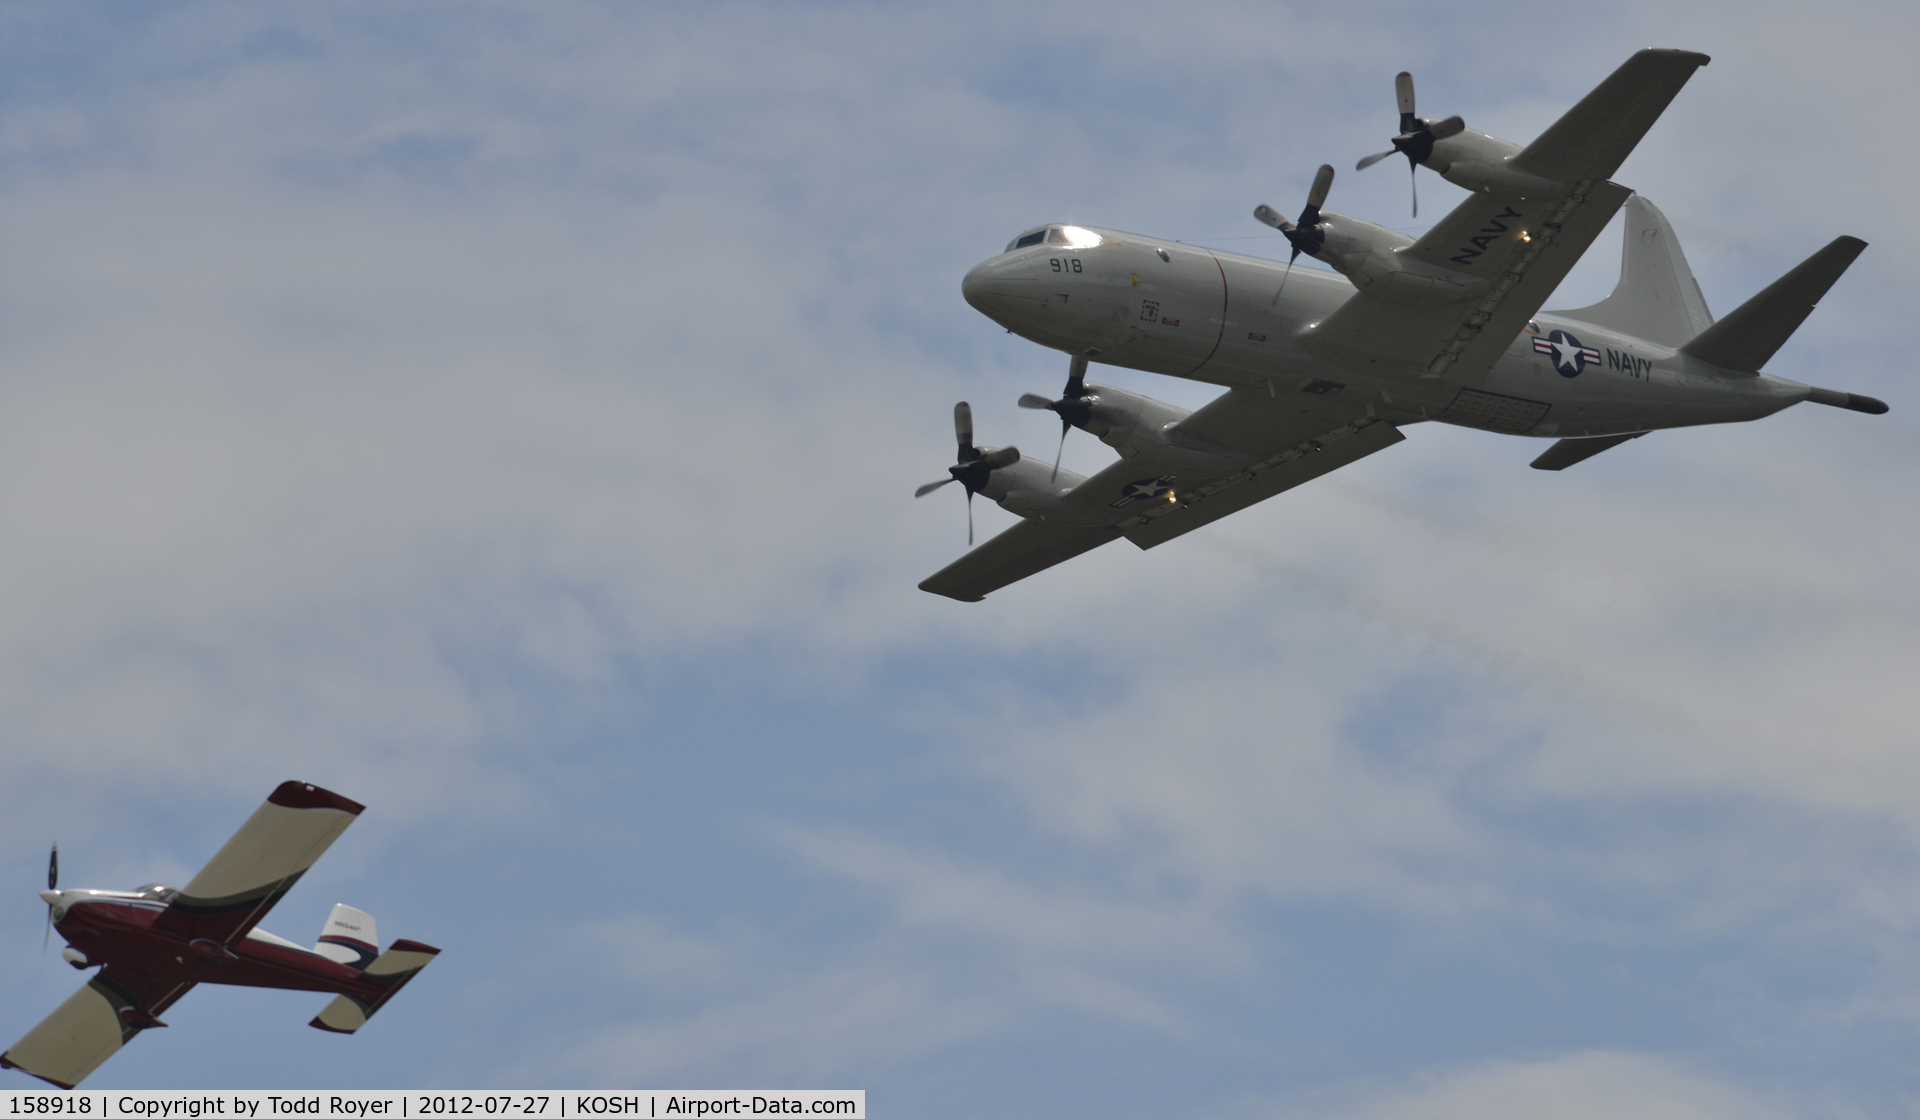 158918, Lockheed P-3C Orion C/N 285A-5590, Navy P-3 going around after overtaking departing RV.